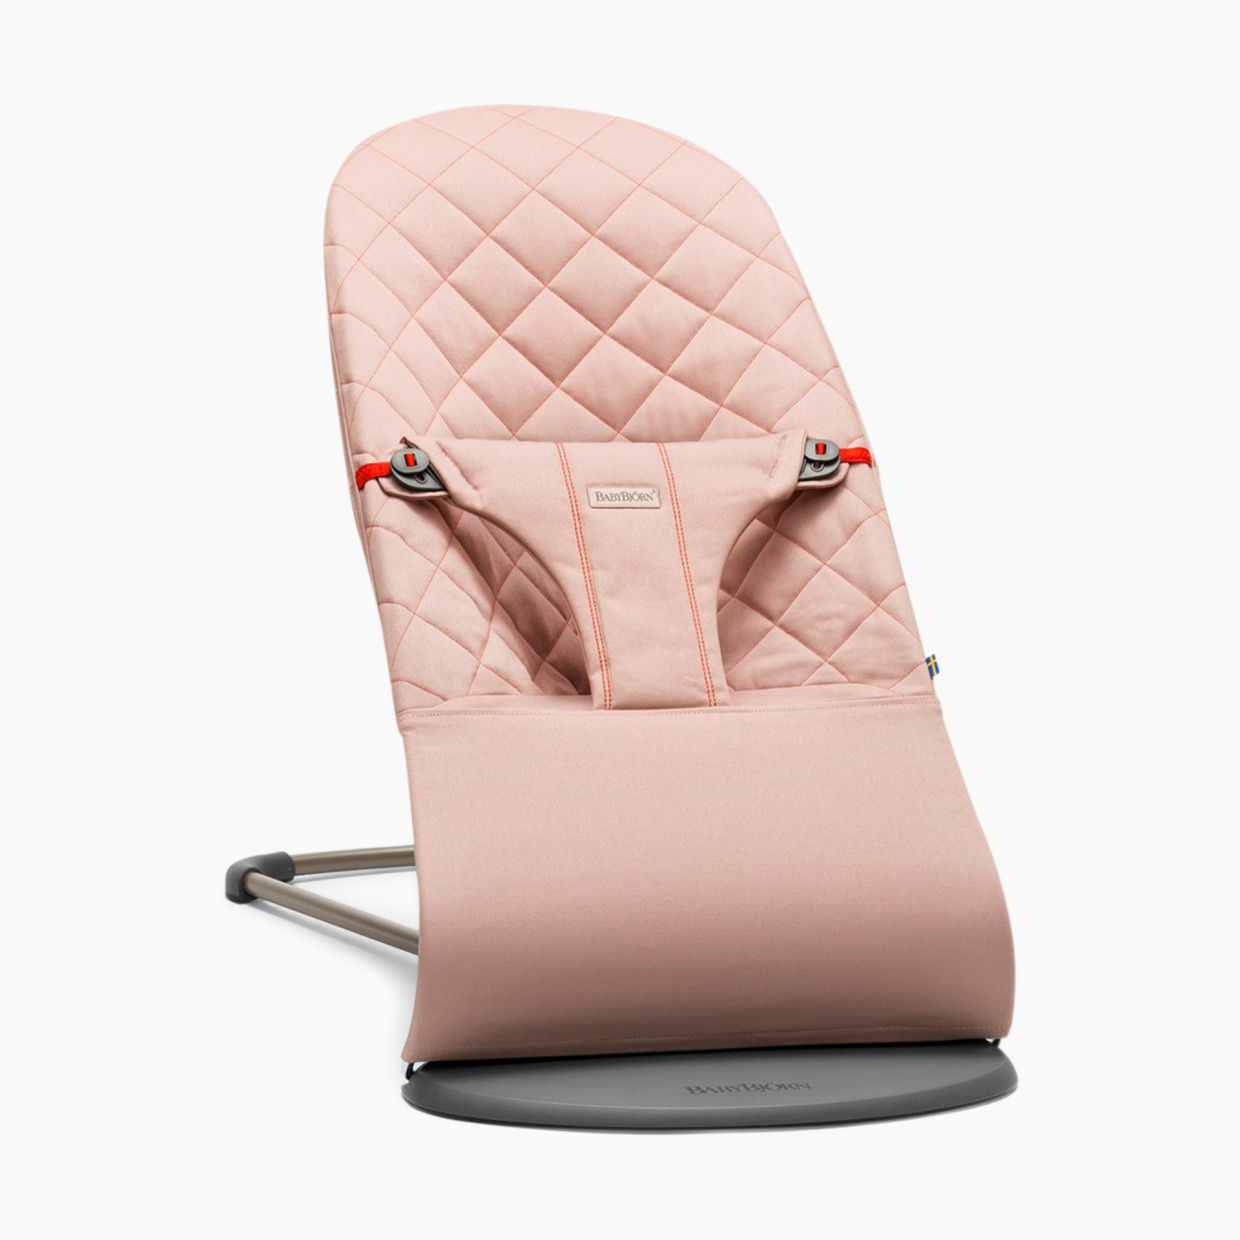 Babybjörn Bouncer Bliss - Dusty Pink Quilted Cotton/Dark Gray Frame.